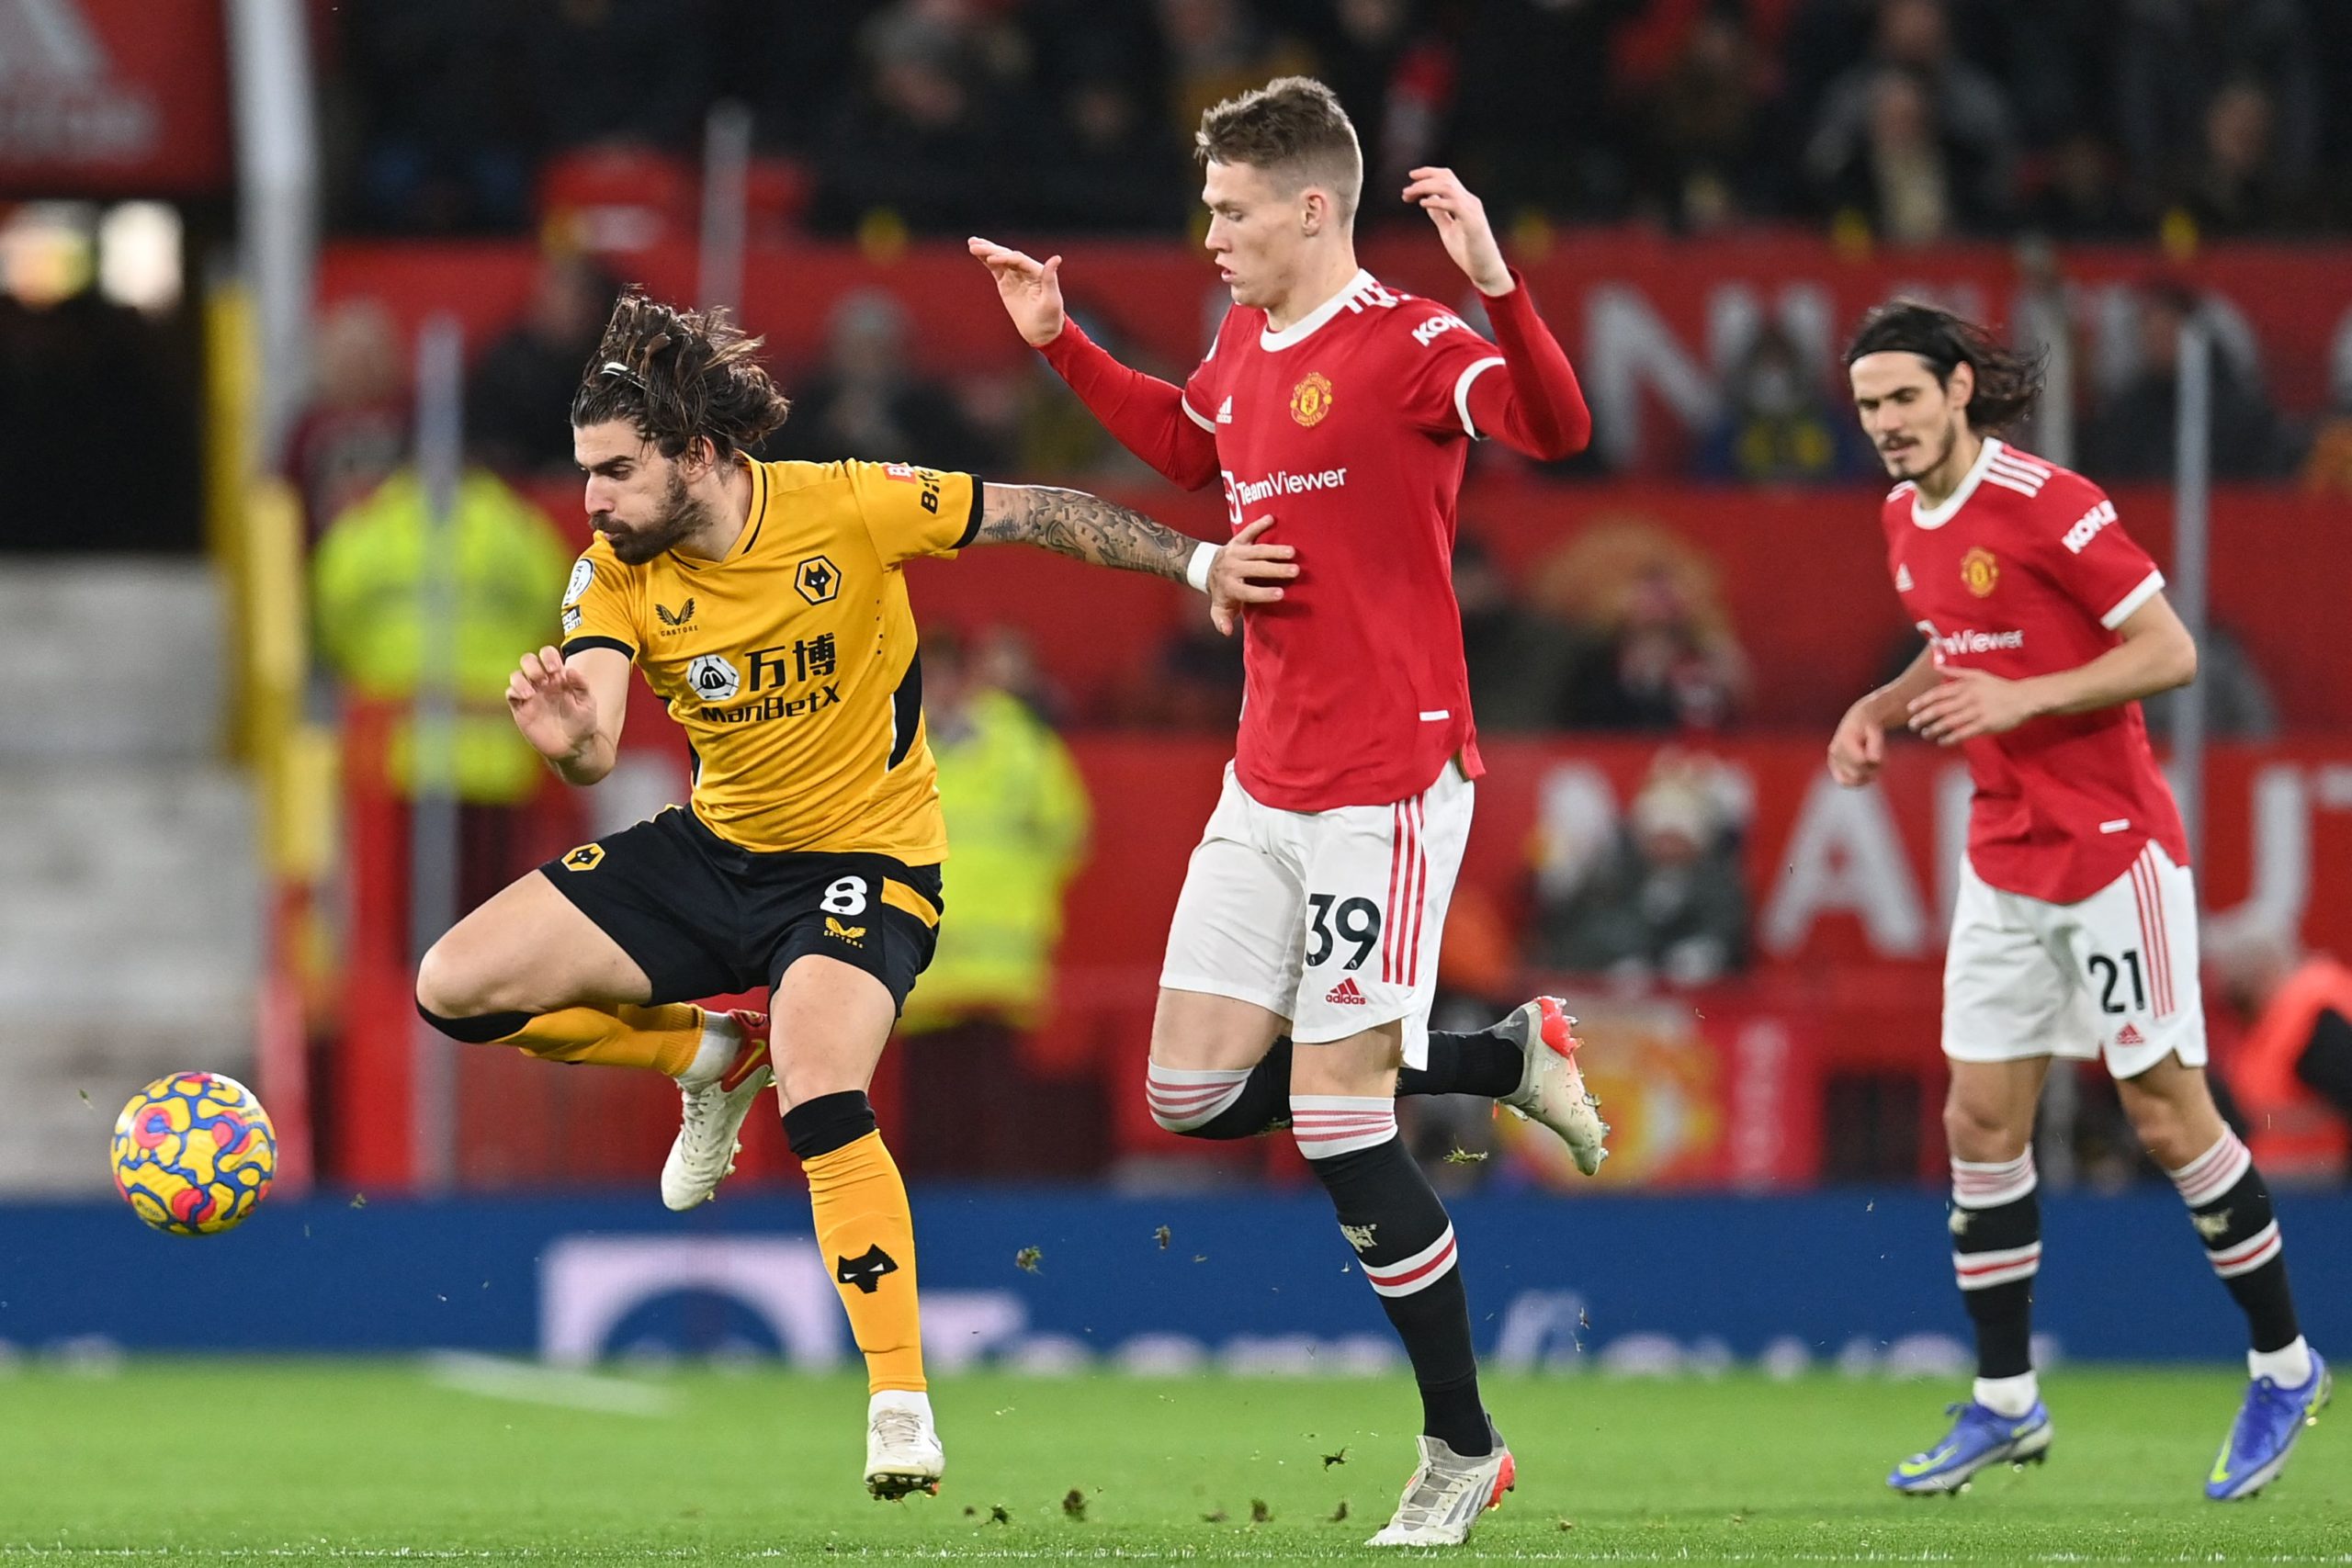 Manchester United linked with Ruben Neves again, repeating Bruno Fernandes scenario